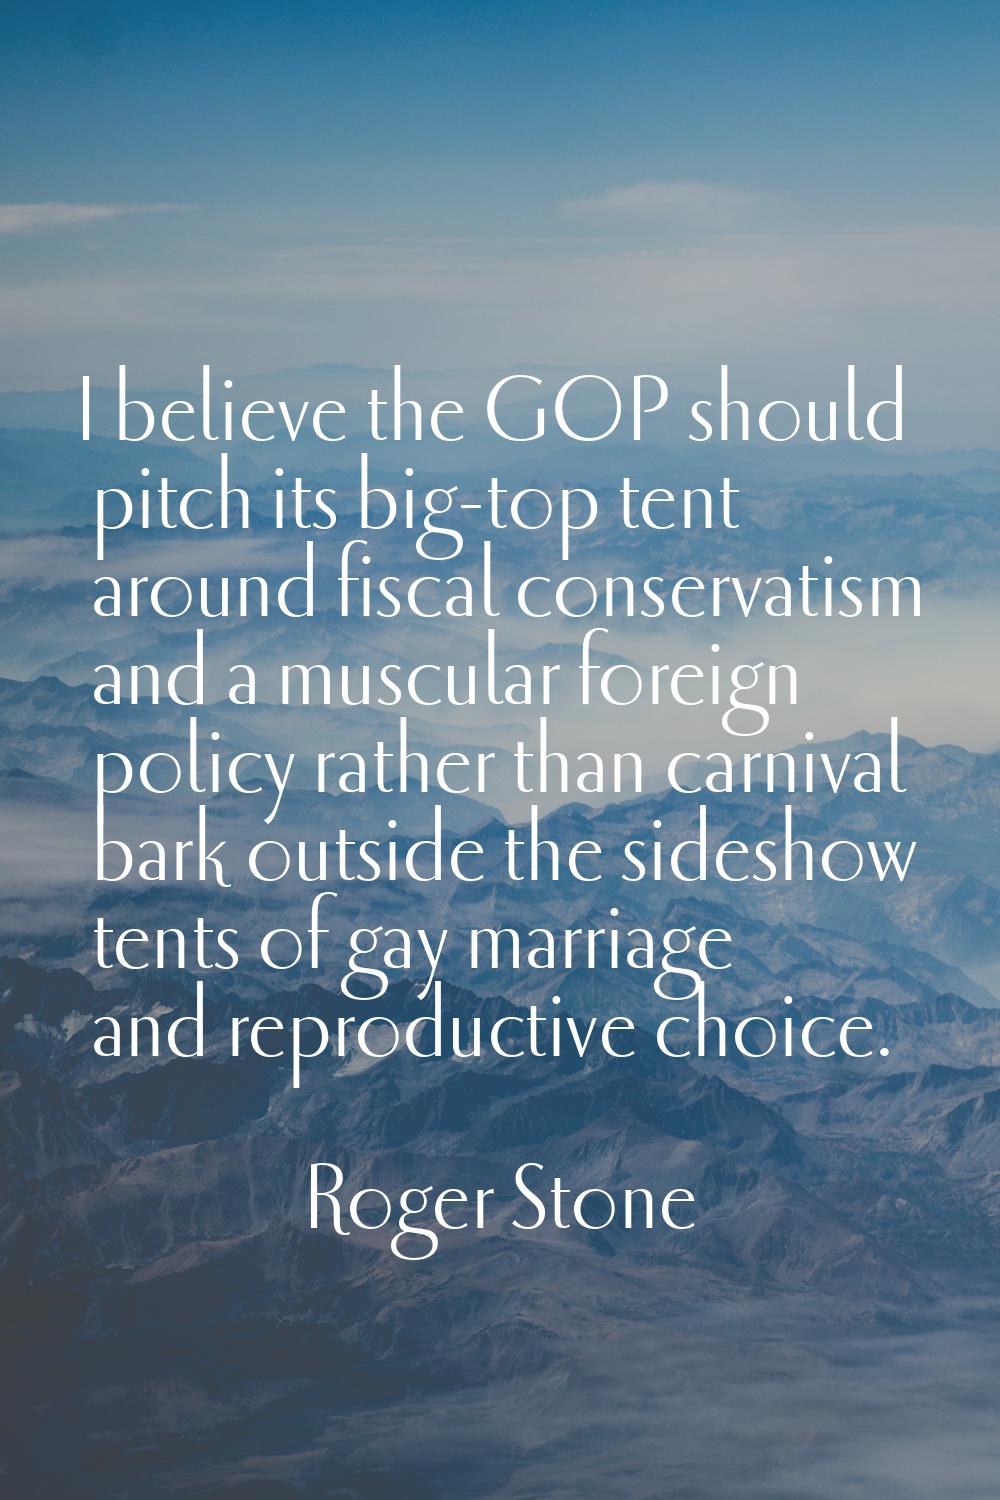 I believe the GOP should pitch its big-top tent around fiscal conservatism and a muscular foreign p